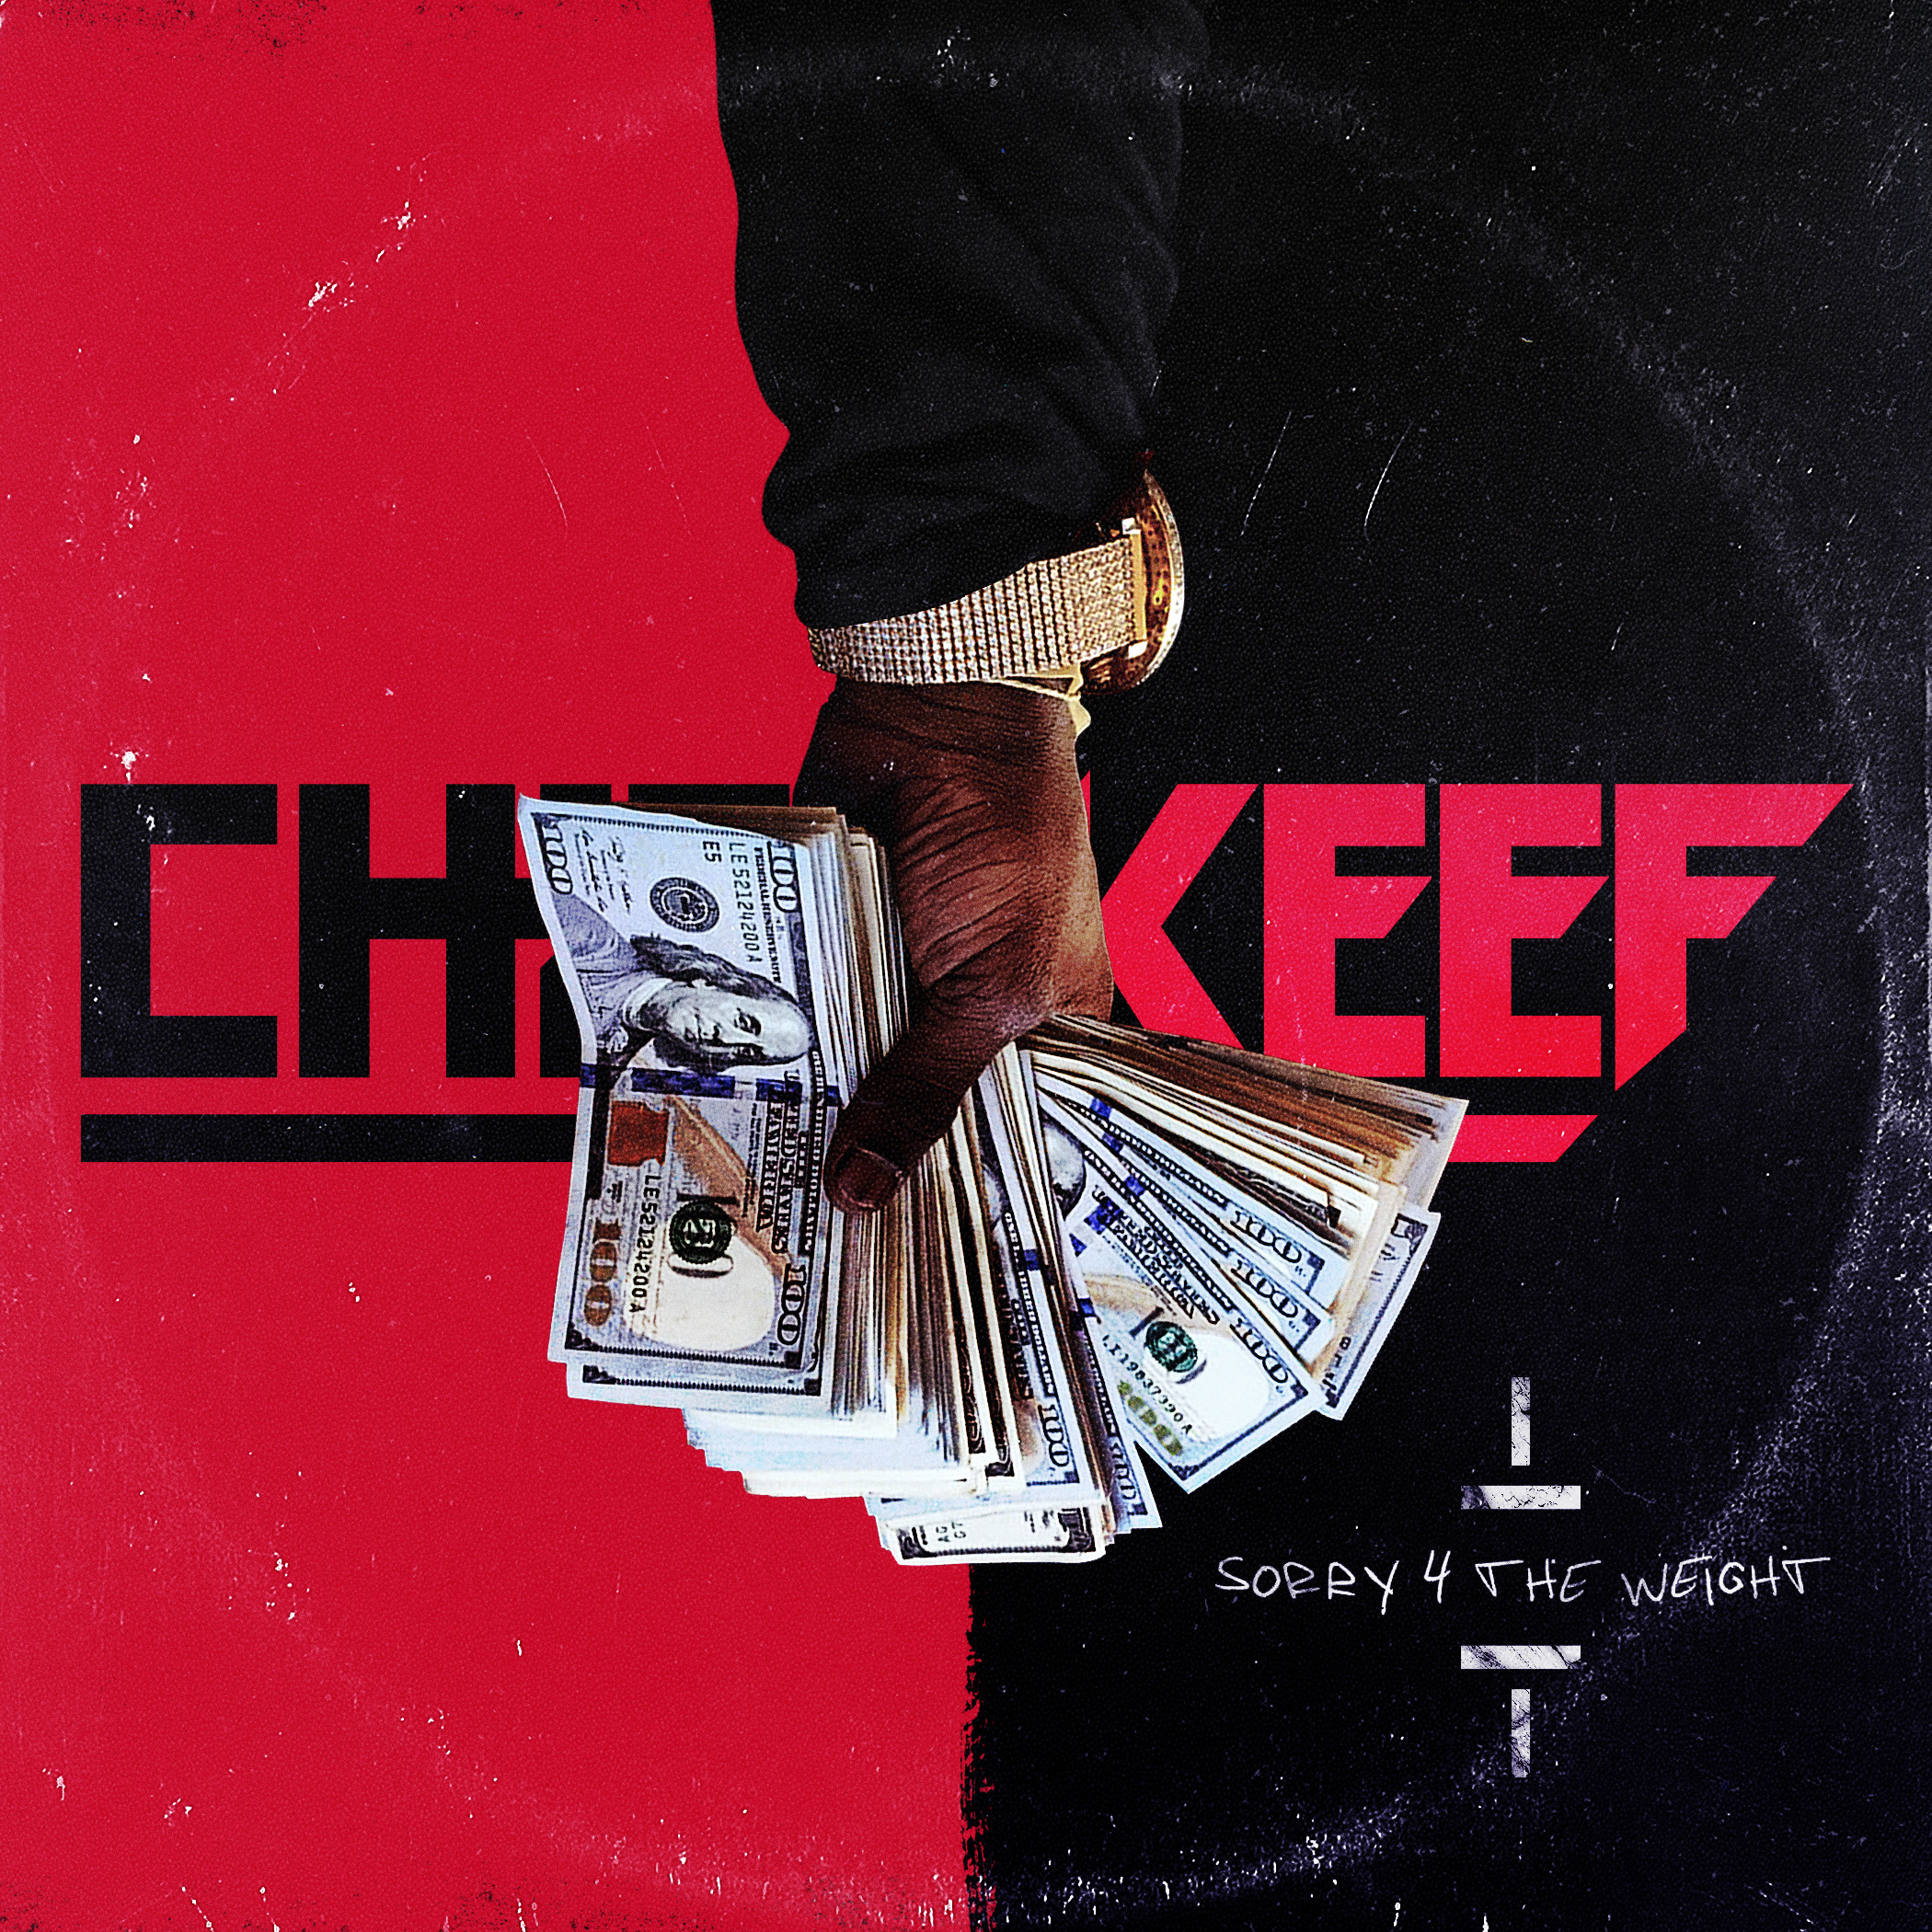 Chief Keef - Chief Keef Album Covers - HD Wallpaper 